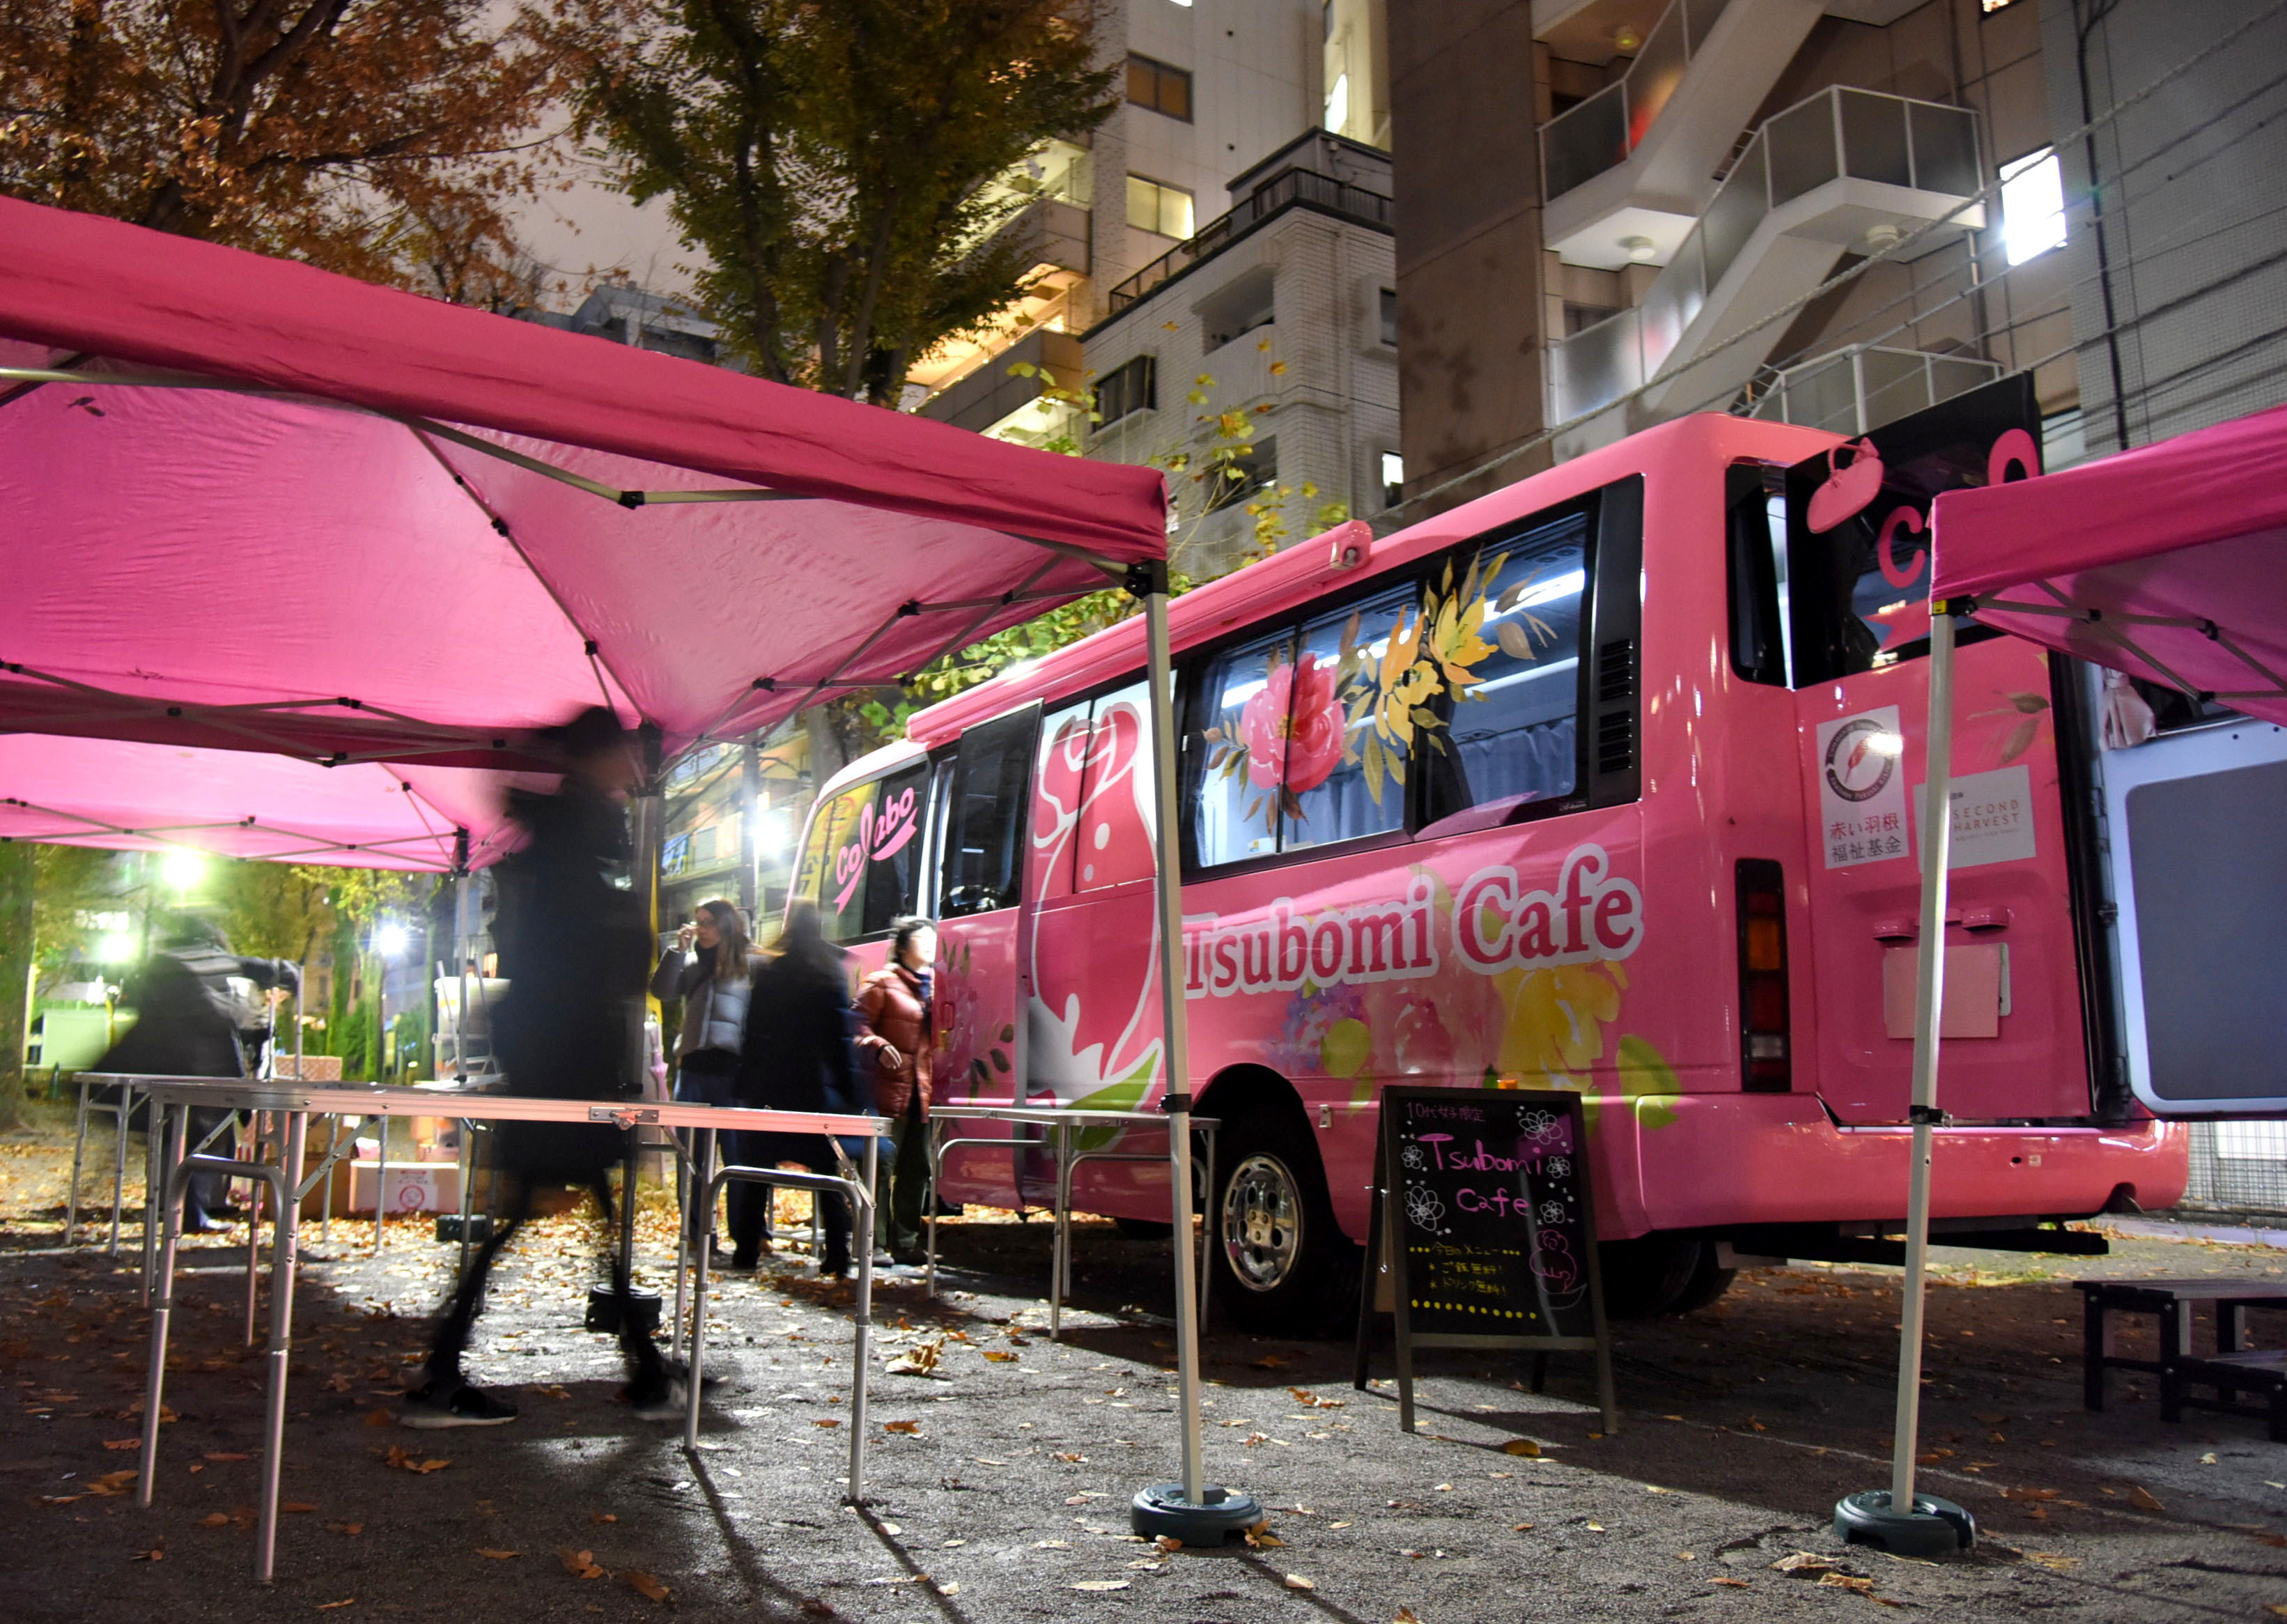 Tokyo bus cafe, a safe haven from sexual exploitation for troubled young girls pic